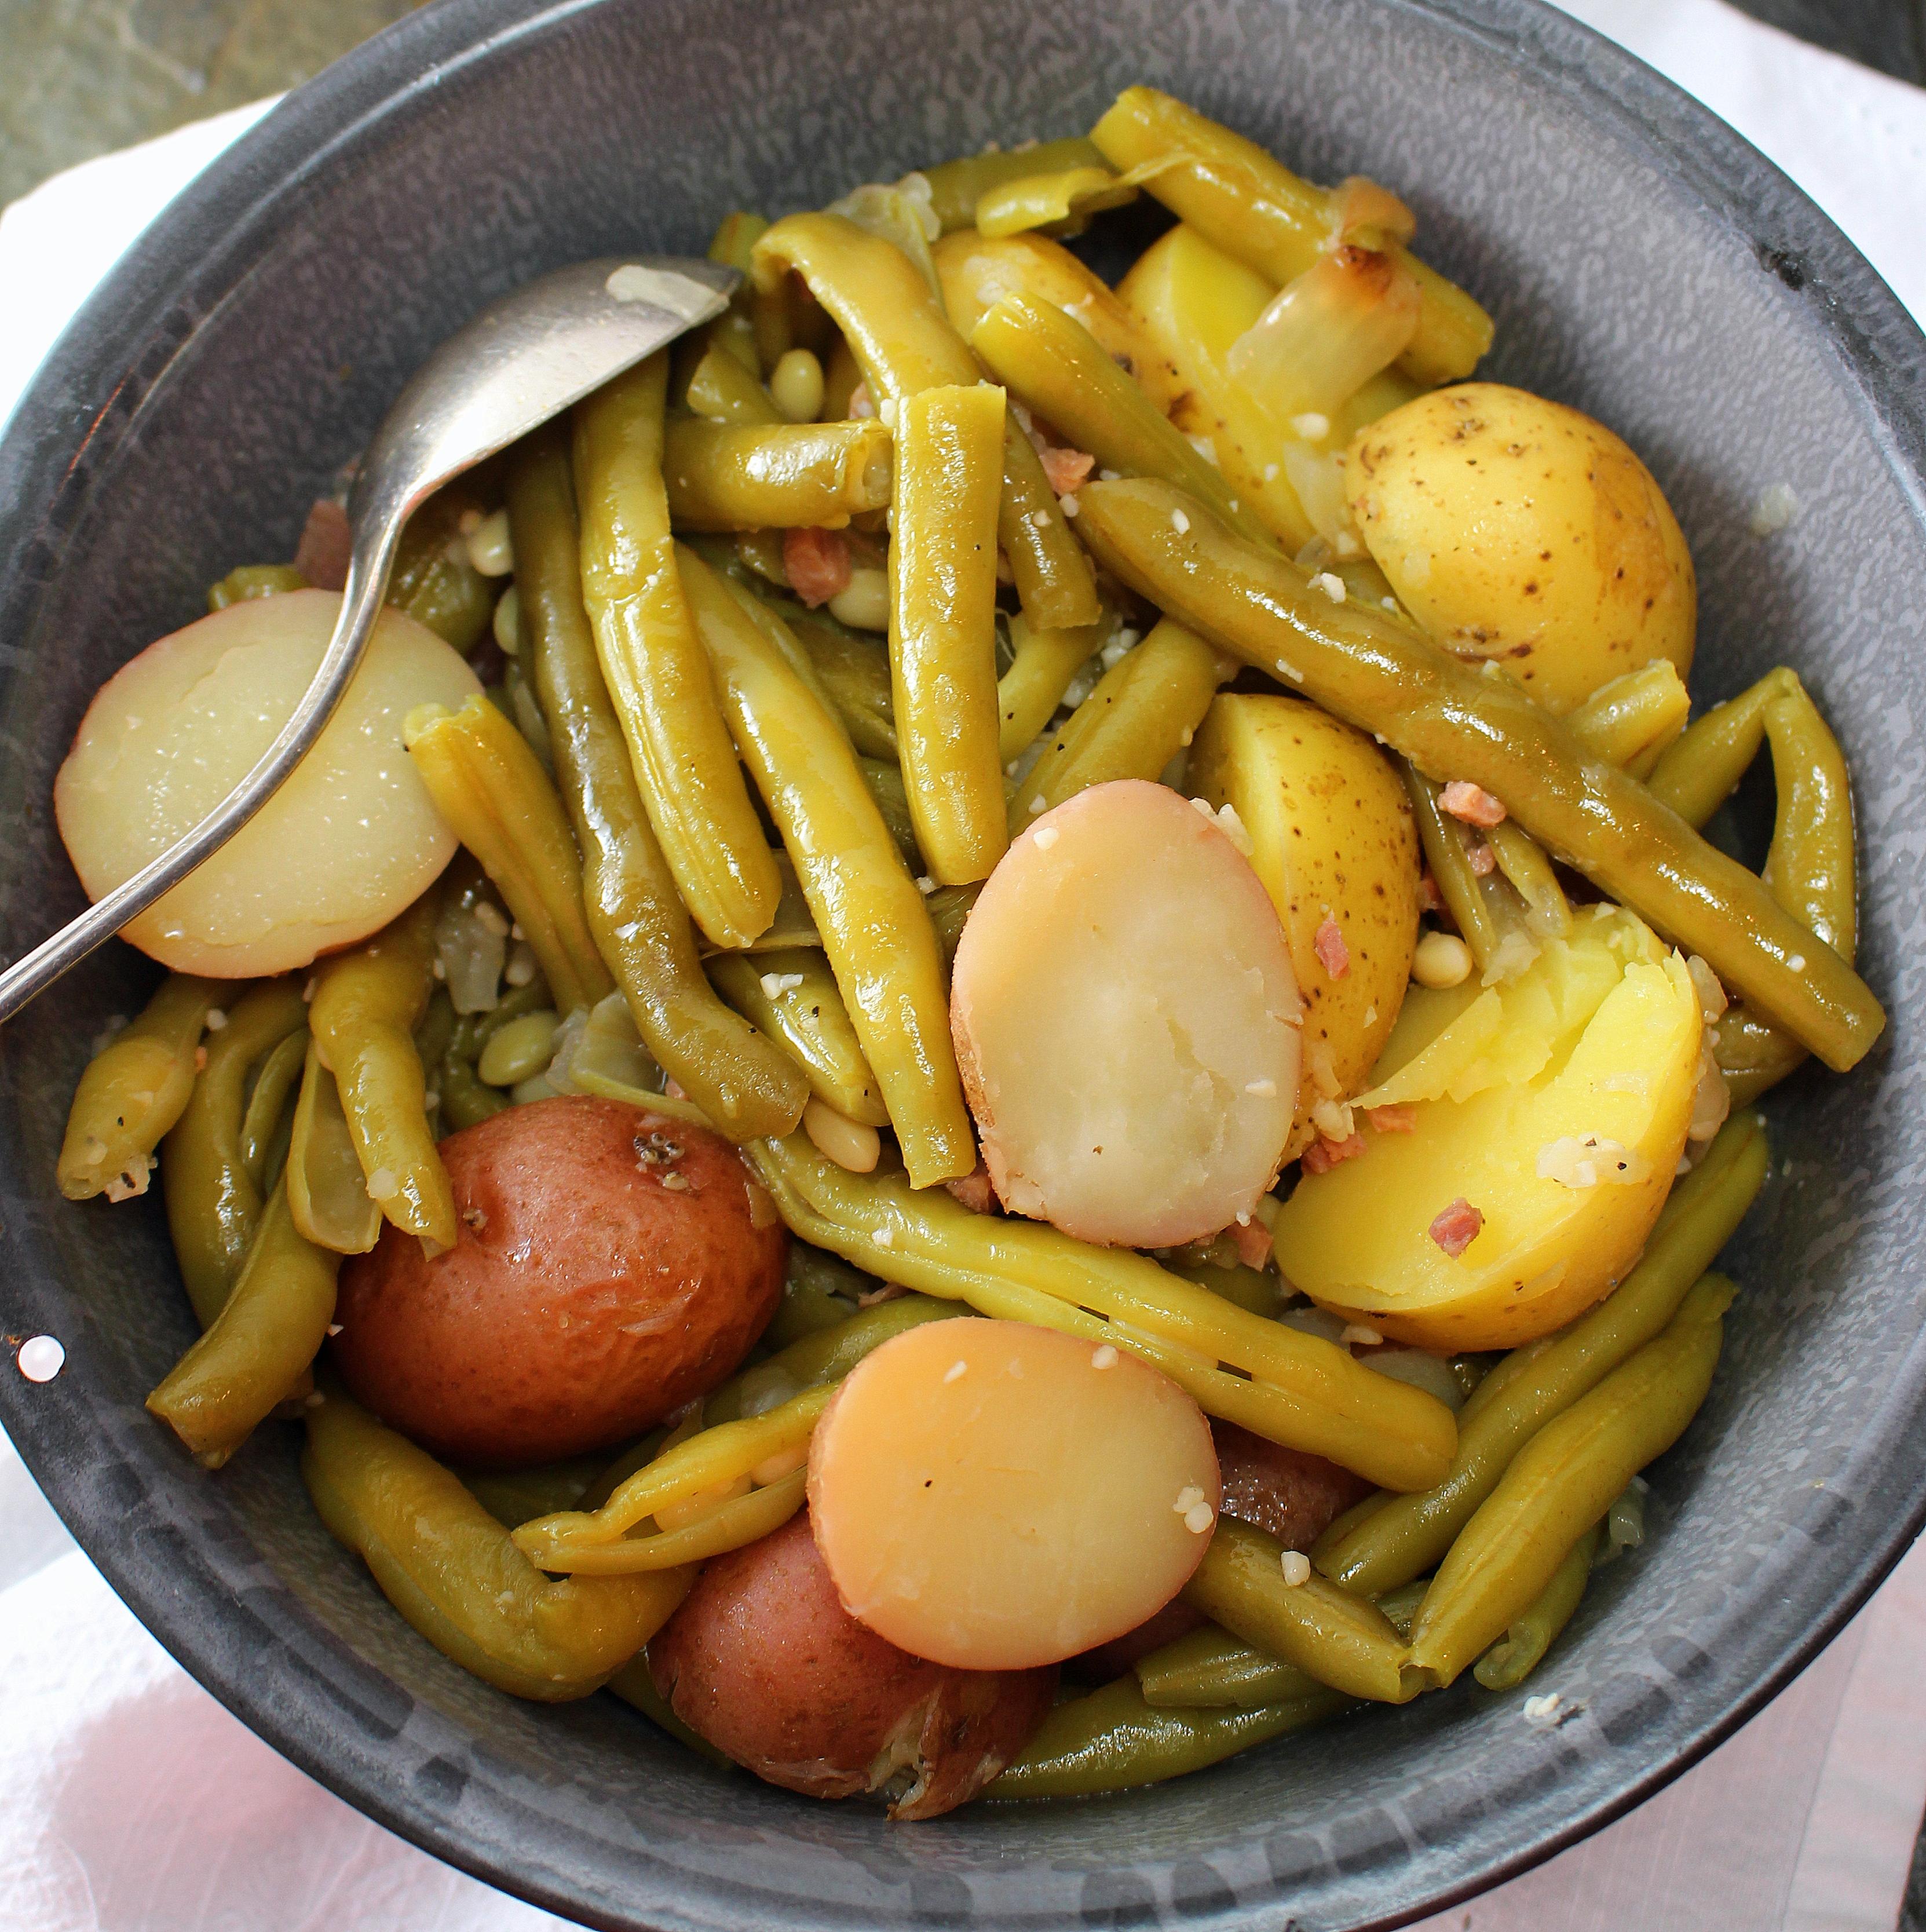 Braised Half-Runner Beans with Potatoes